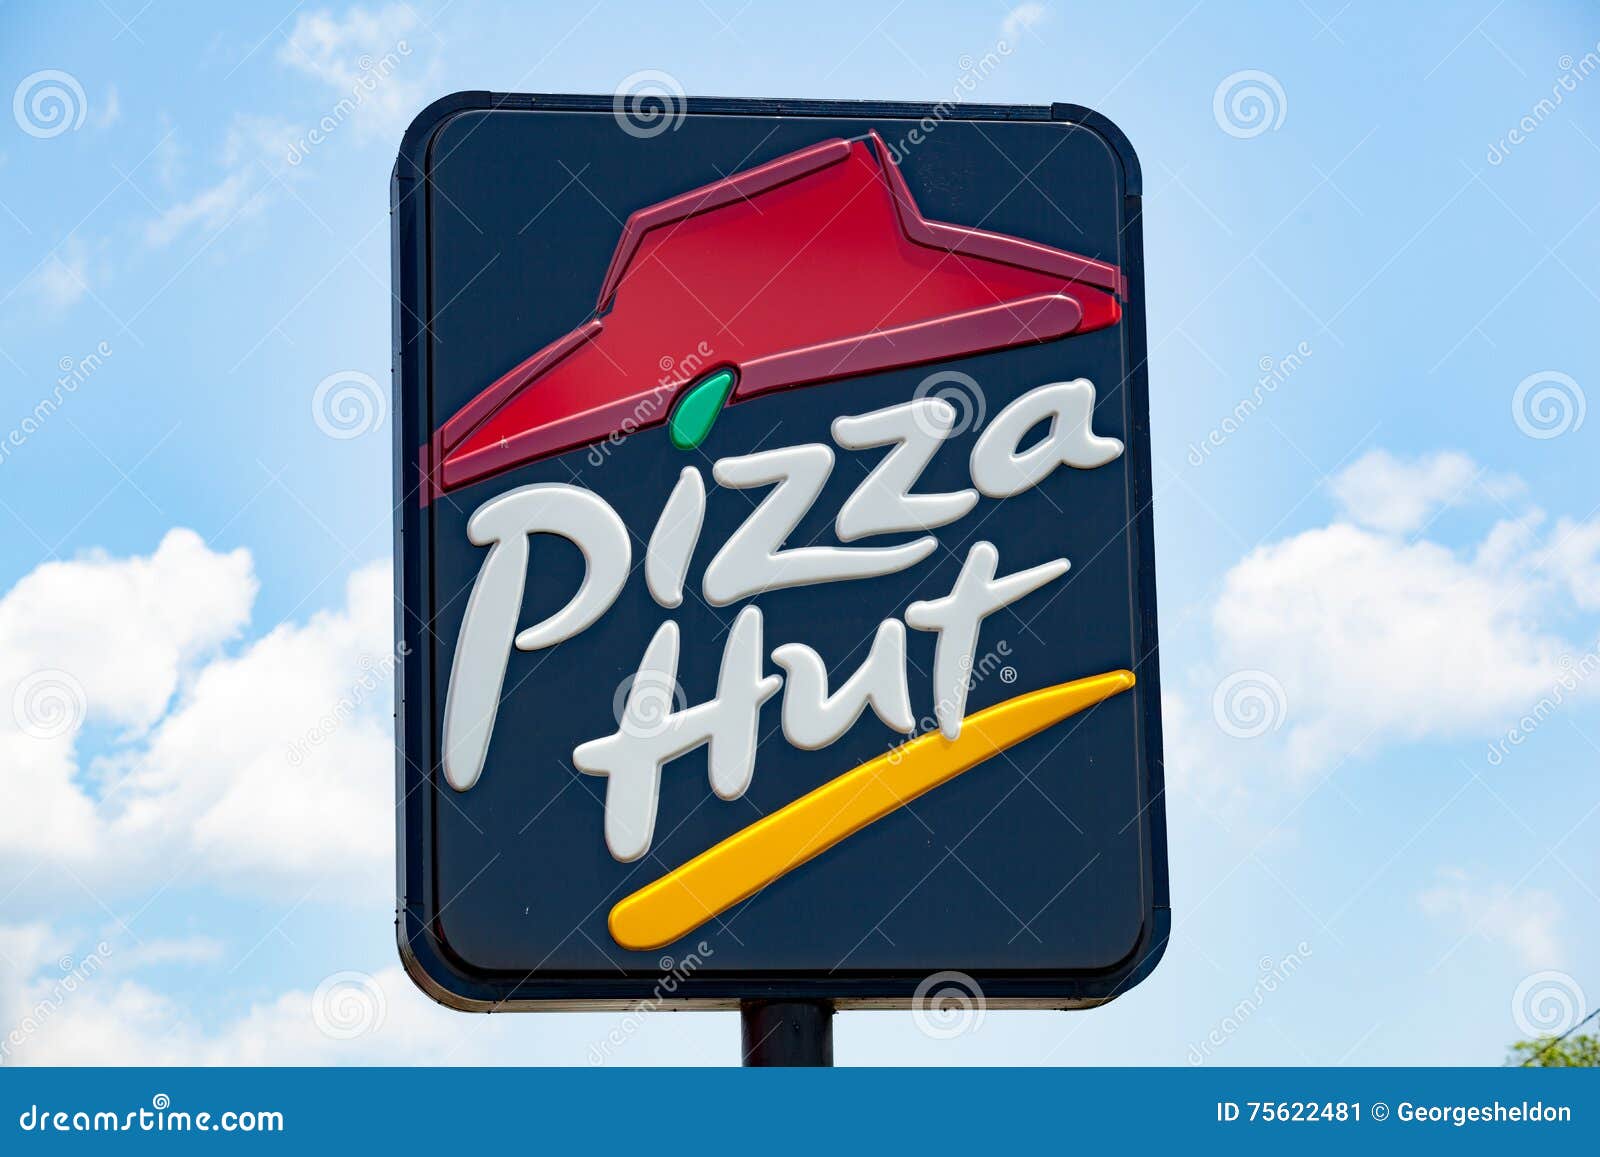 Sign For Restaurant Chain Pizza Hut Editorial Photo Image Of